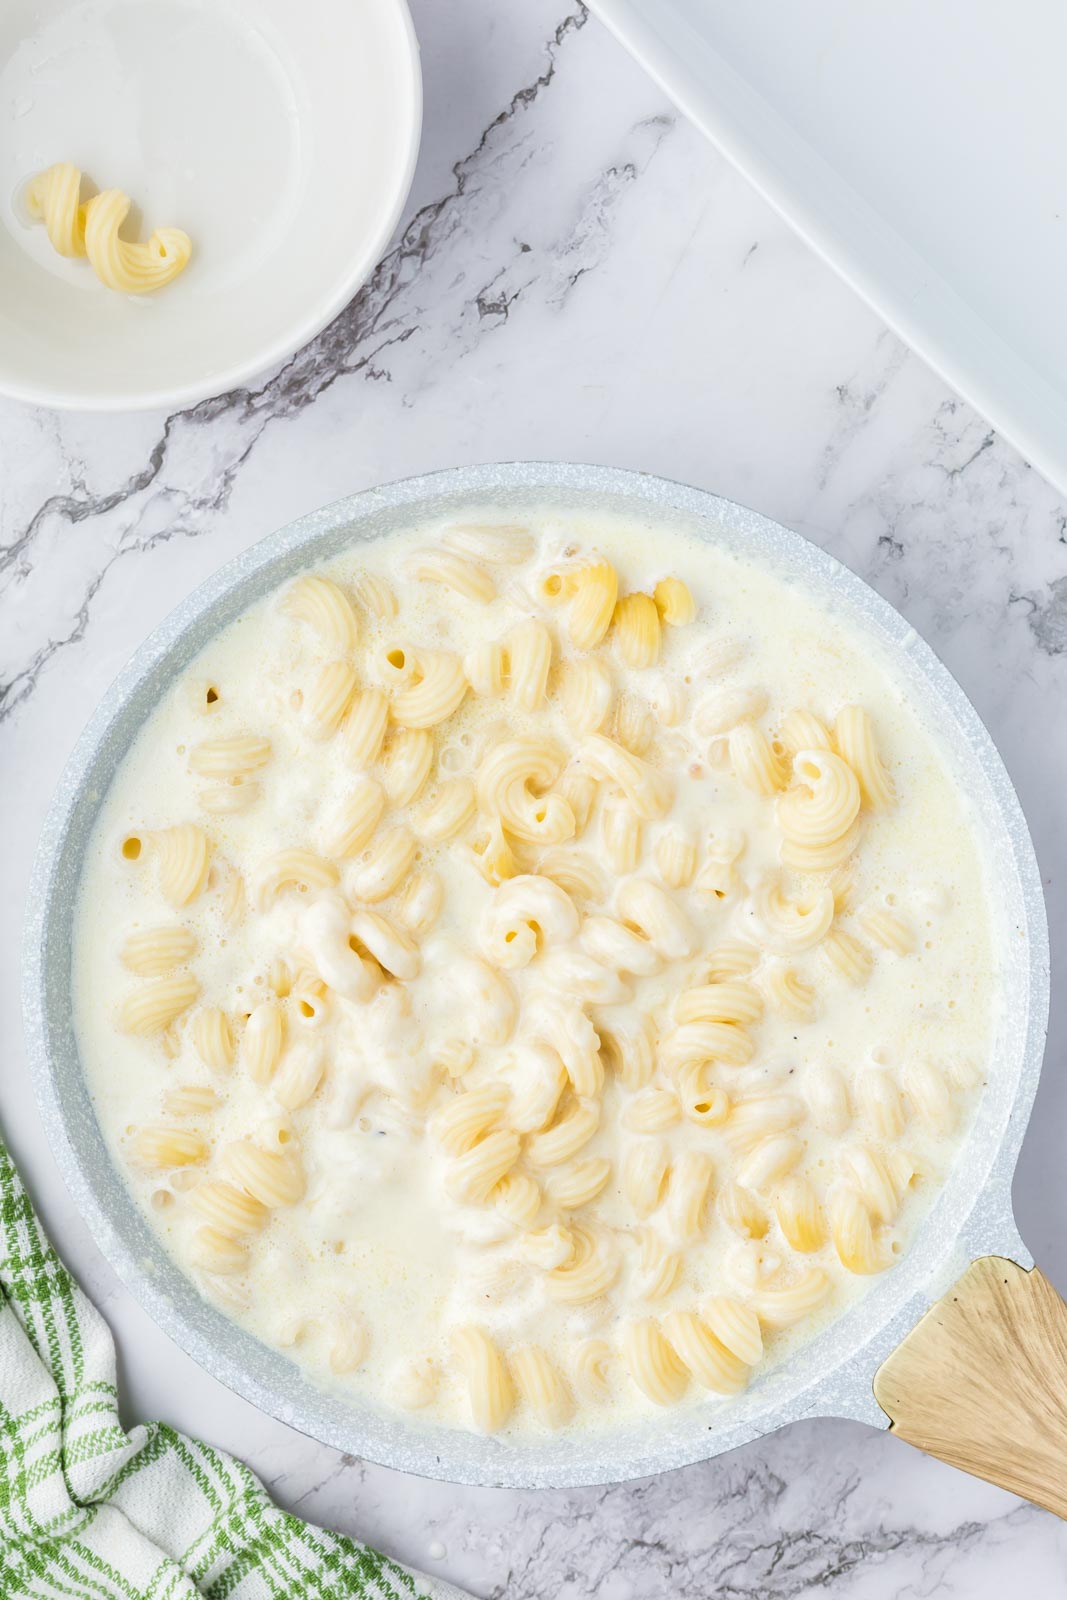 Coating macaroni noodles in cheesy white sauce.